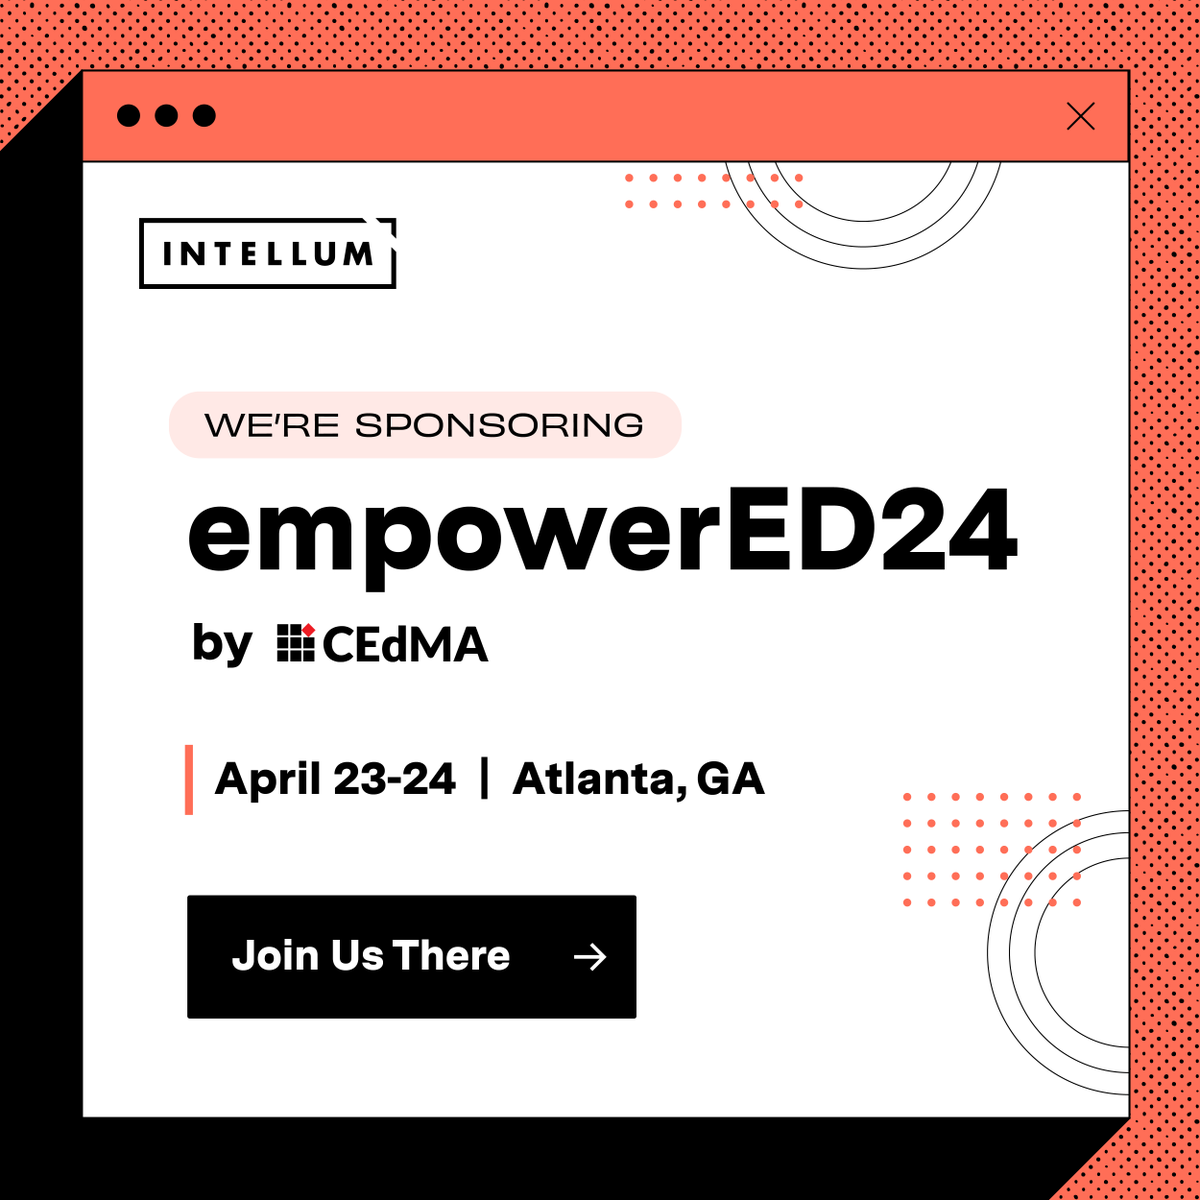 🎉 Only 2 weeks left until CEdMA's empowerED24 event!

Join our friend Marc Undeberg from Impact on the last day, Wed, at 10:15am for insights on driving growth with #CustomerEducation at Impact's PXA.

Swing by our booth for some sticky swag!

👉 bit.ly/3ILNDDG